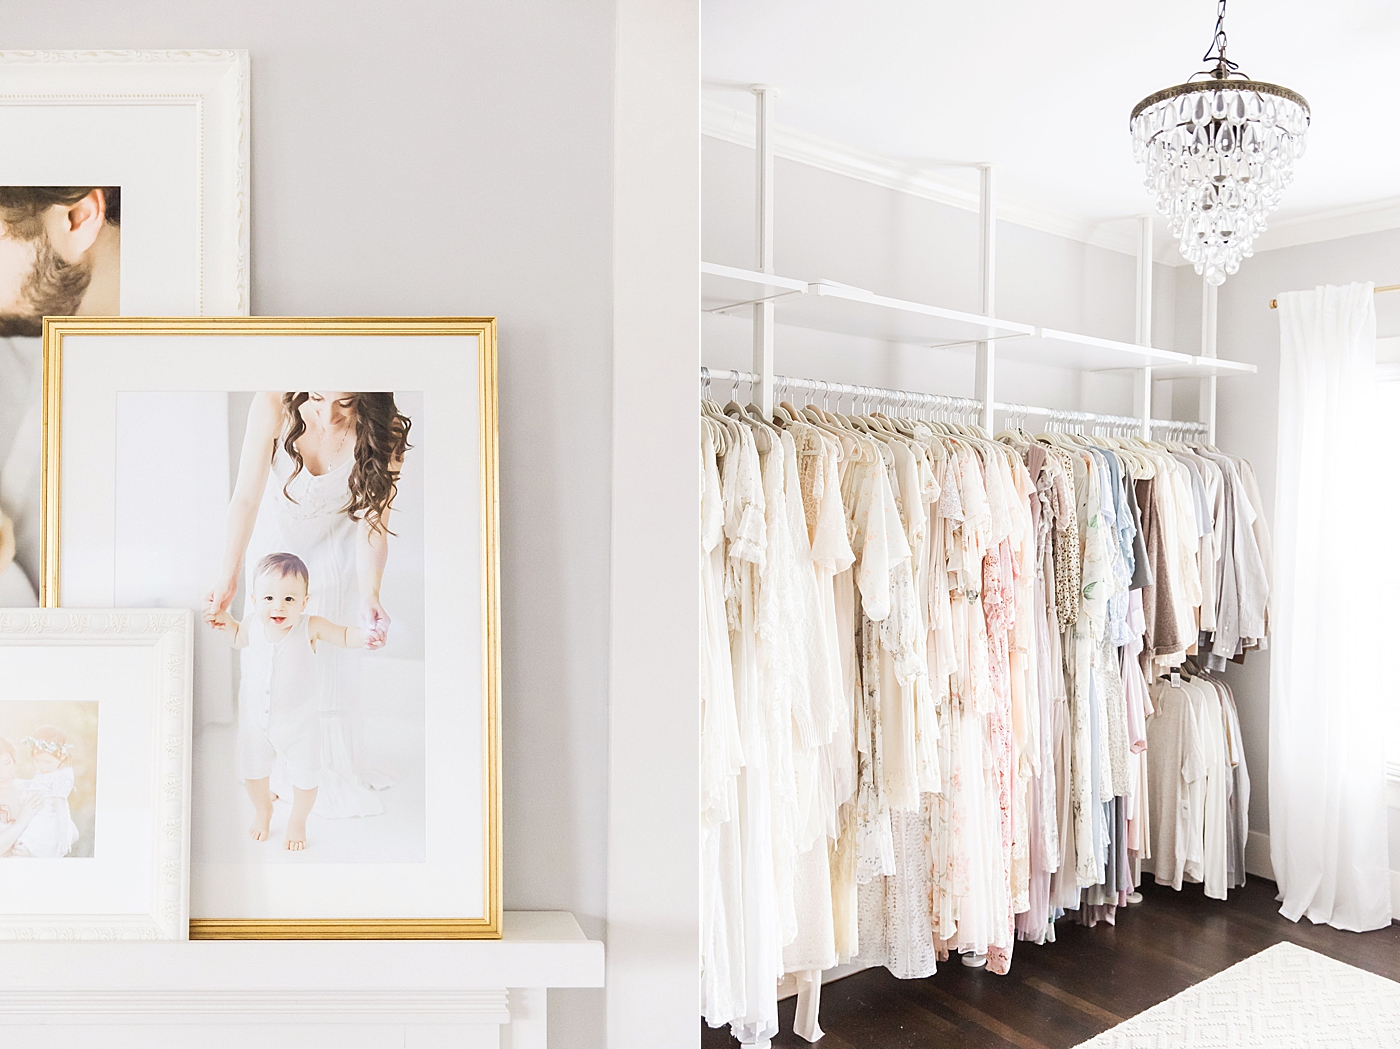 Framed prints and studio wardrobe offered by Houston photographer, Fresh Light Photography.